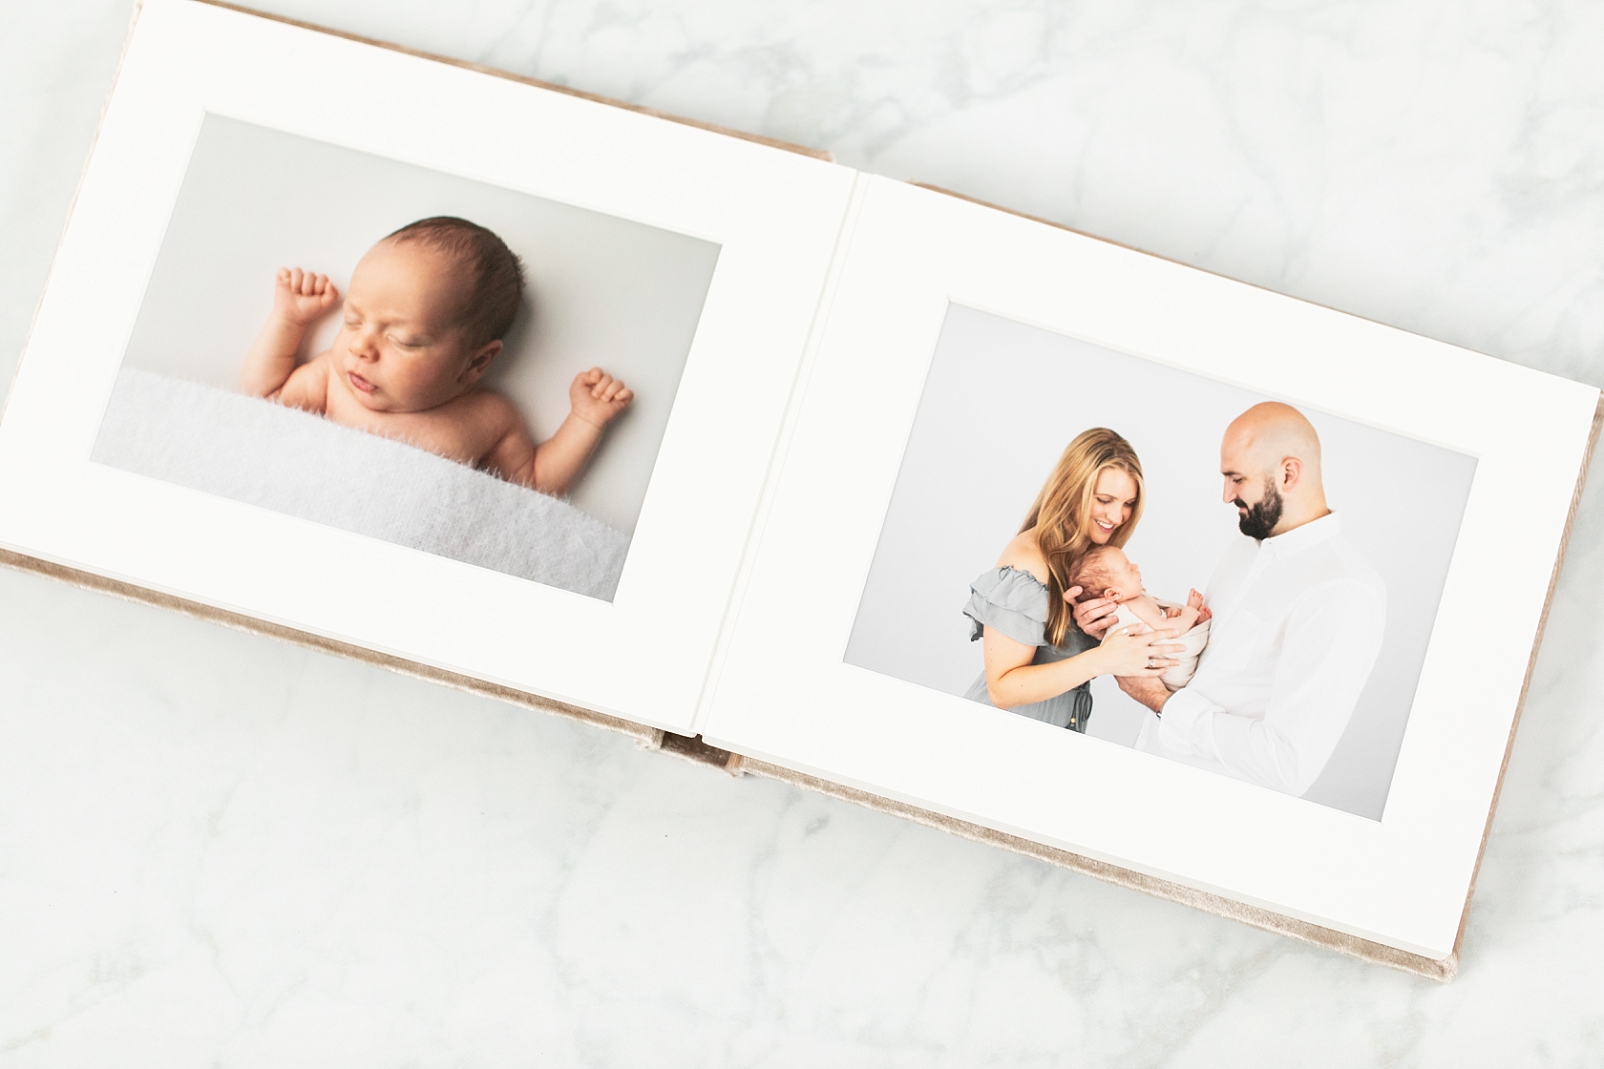 photographs keep our memories in a newborn album with velvet cover showcasing a mom and dad smiling at their baby boy